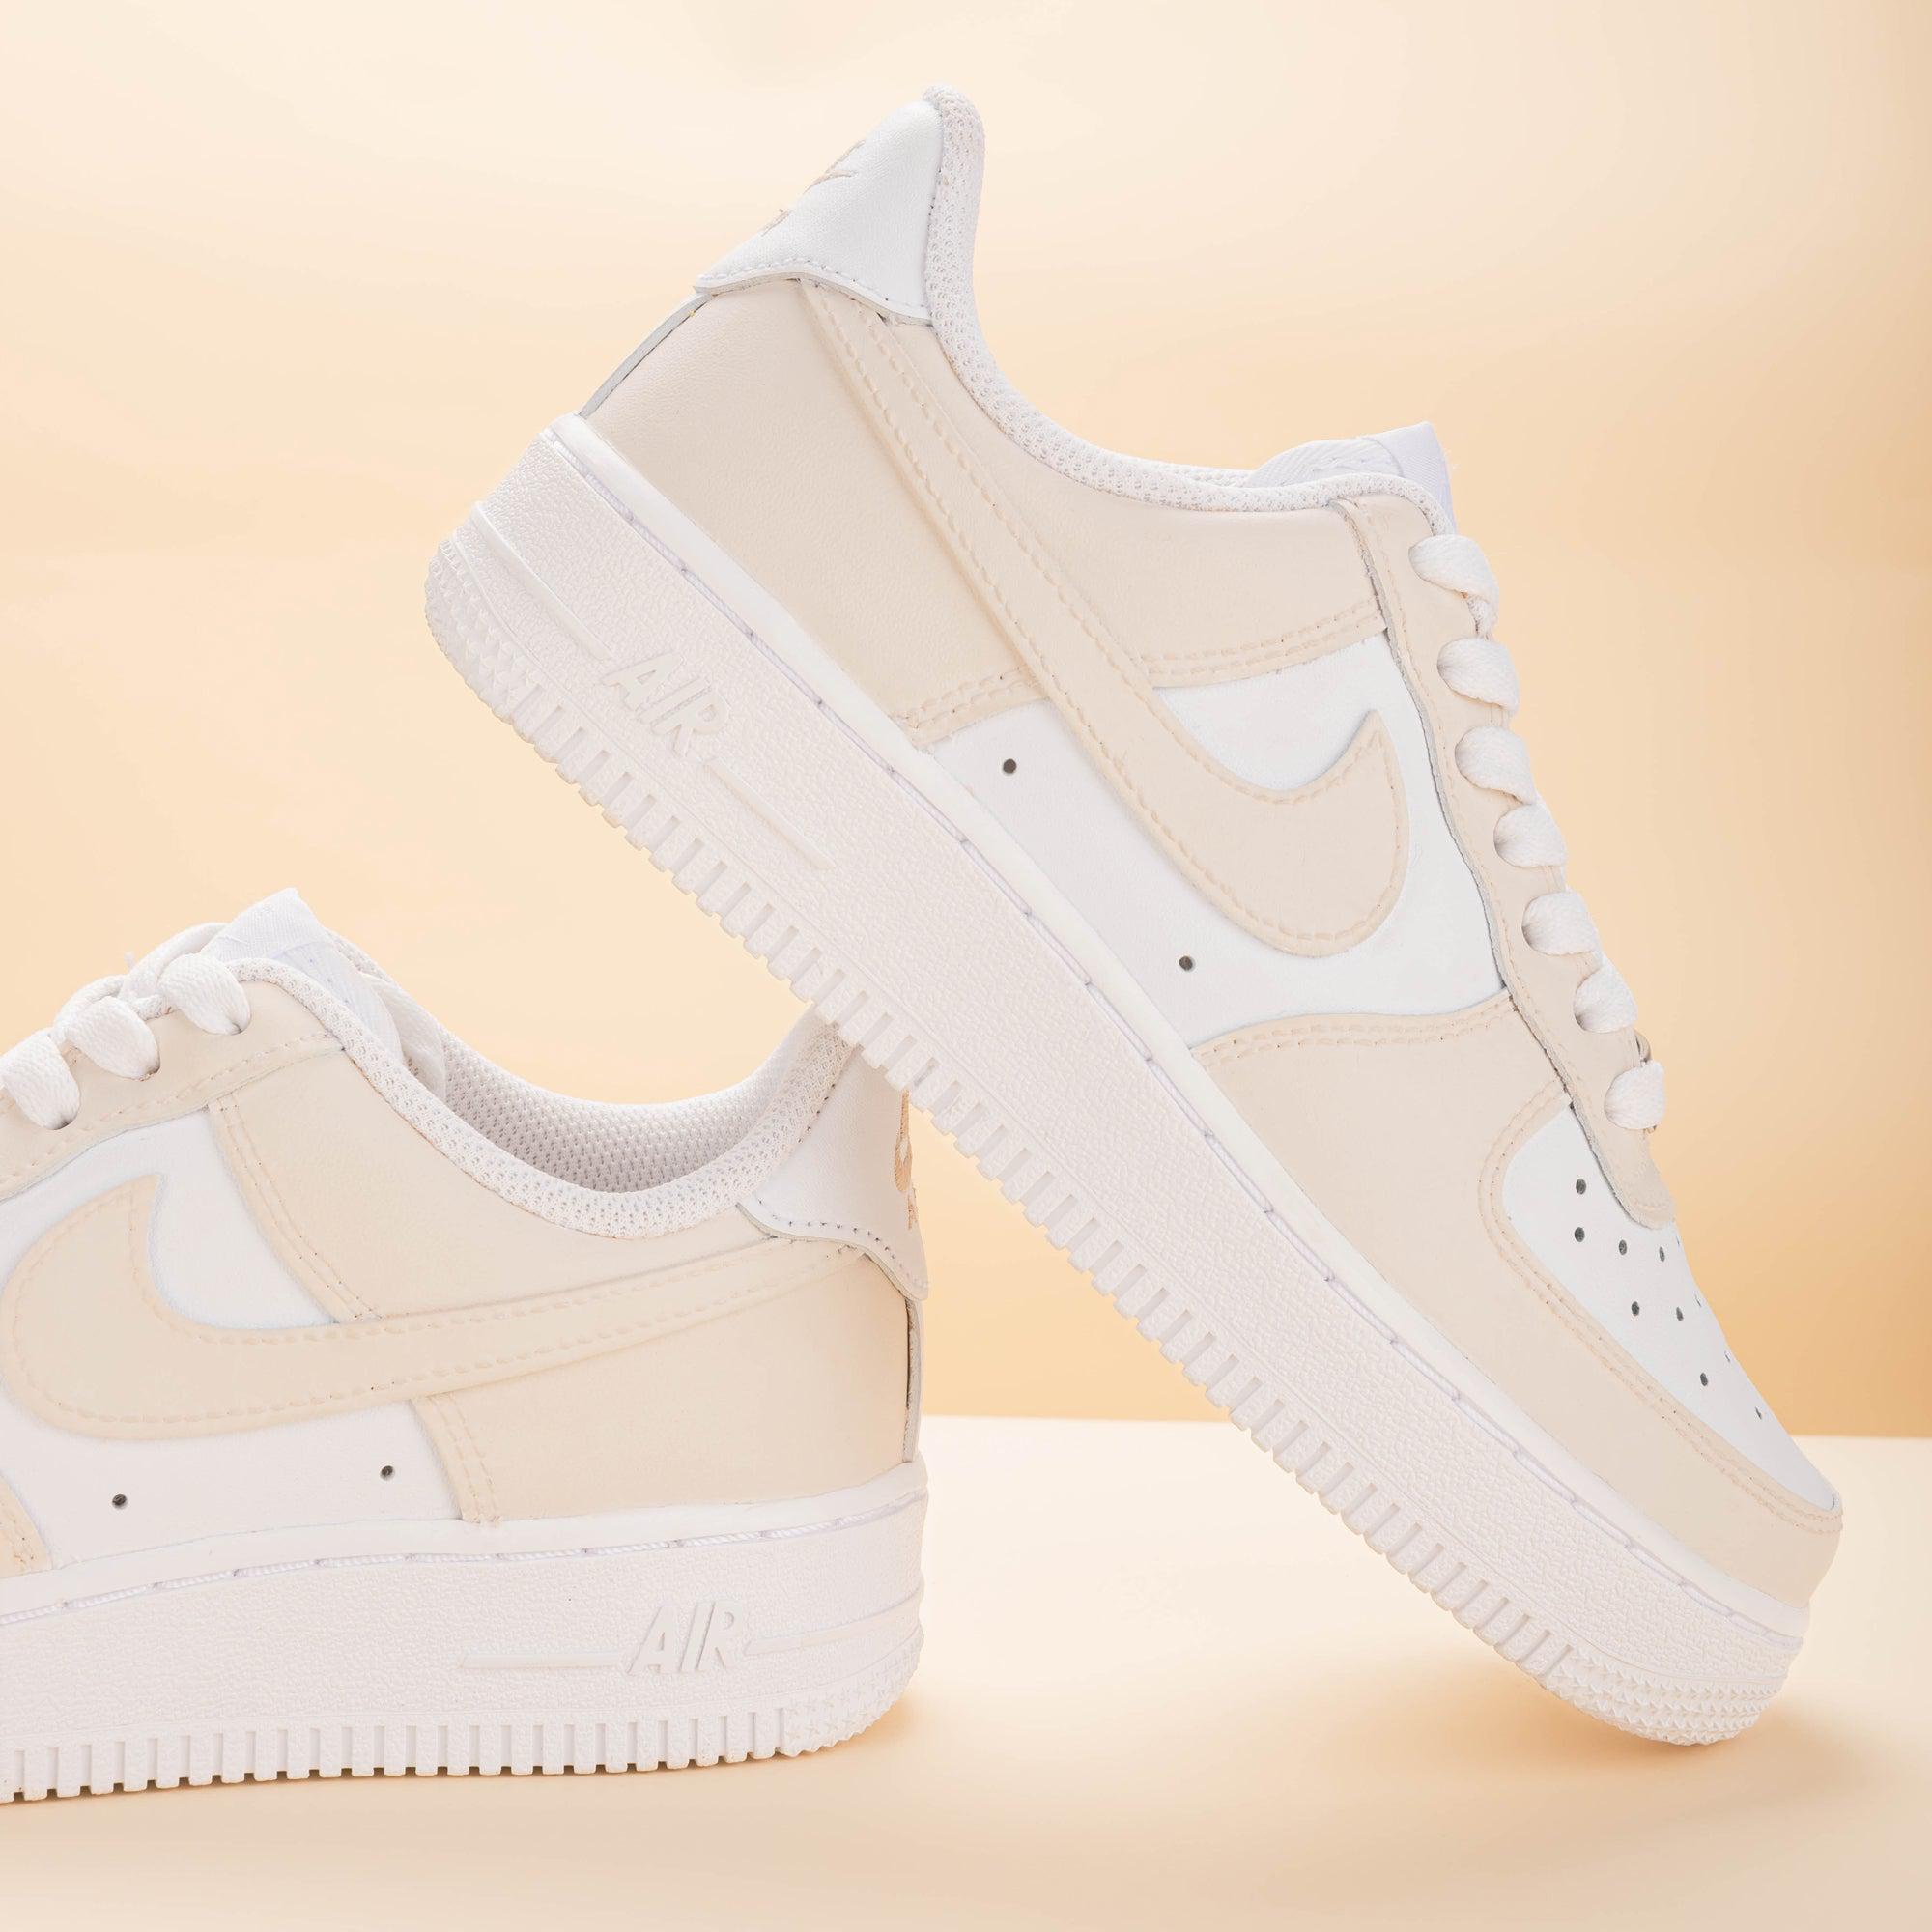 Dripping Beige Custom Air Force 1 Sneakers with Butterflies